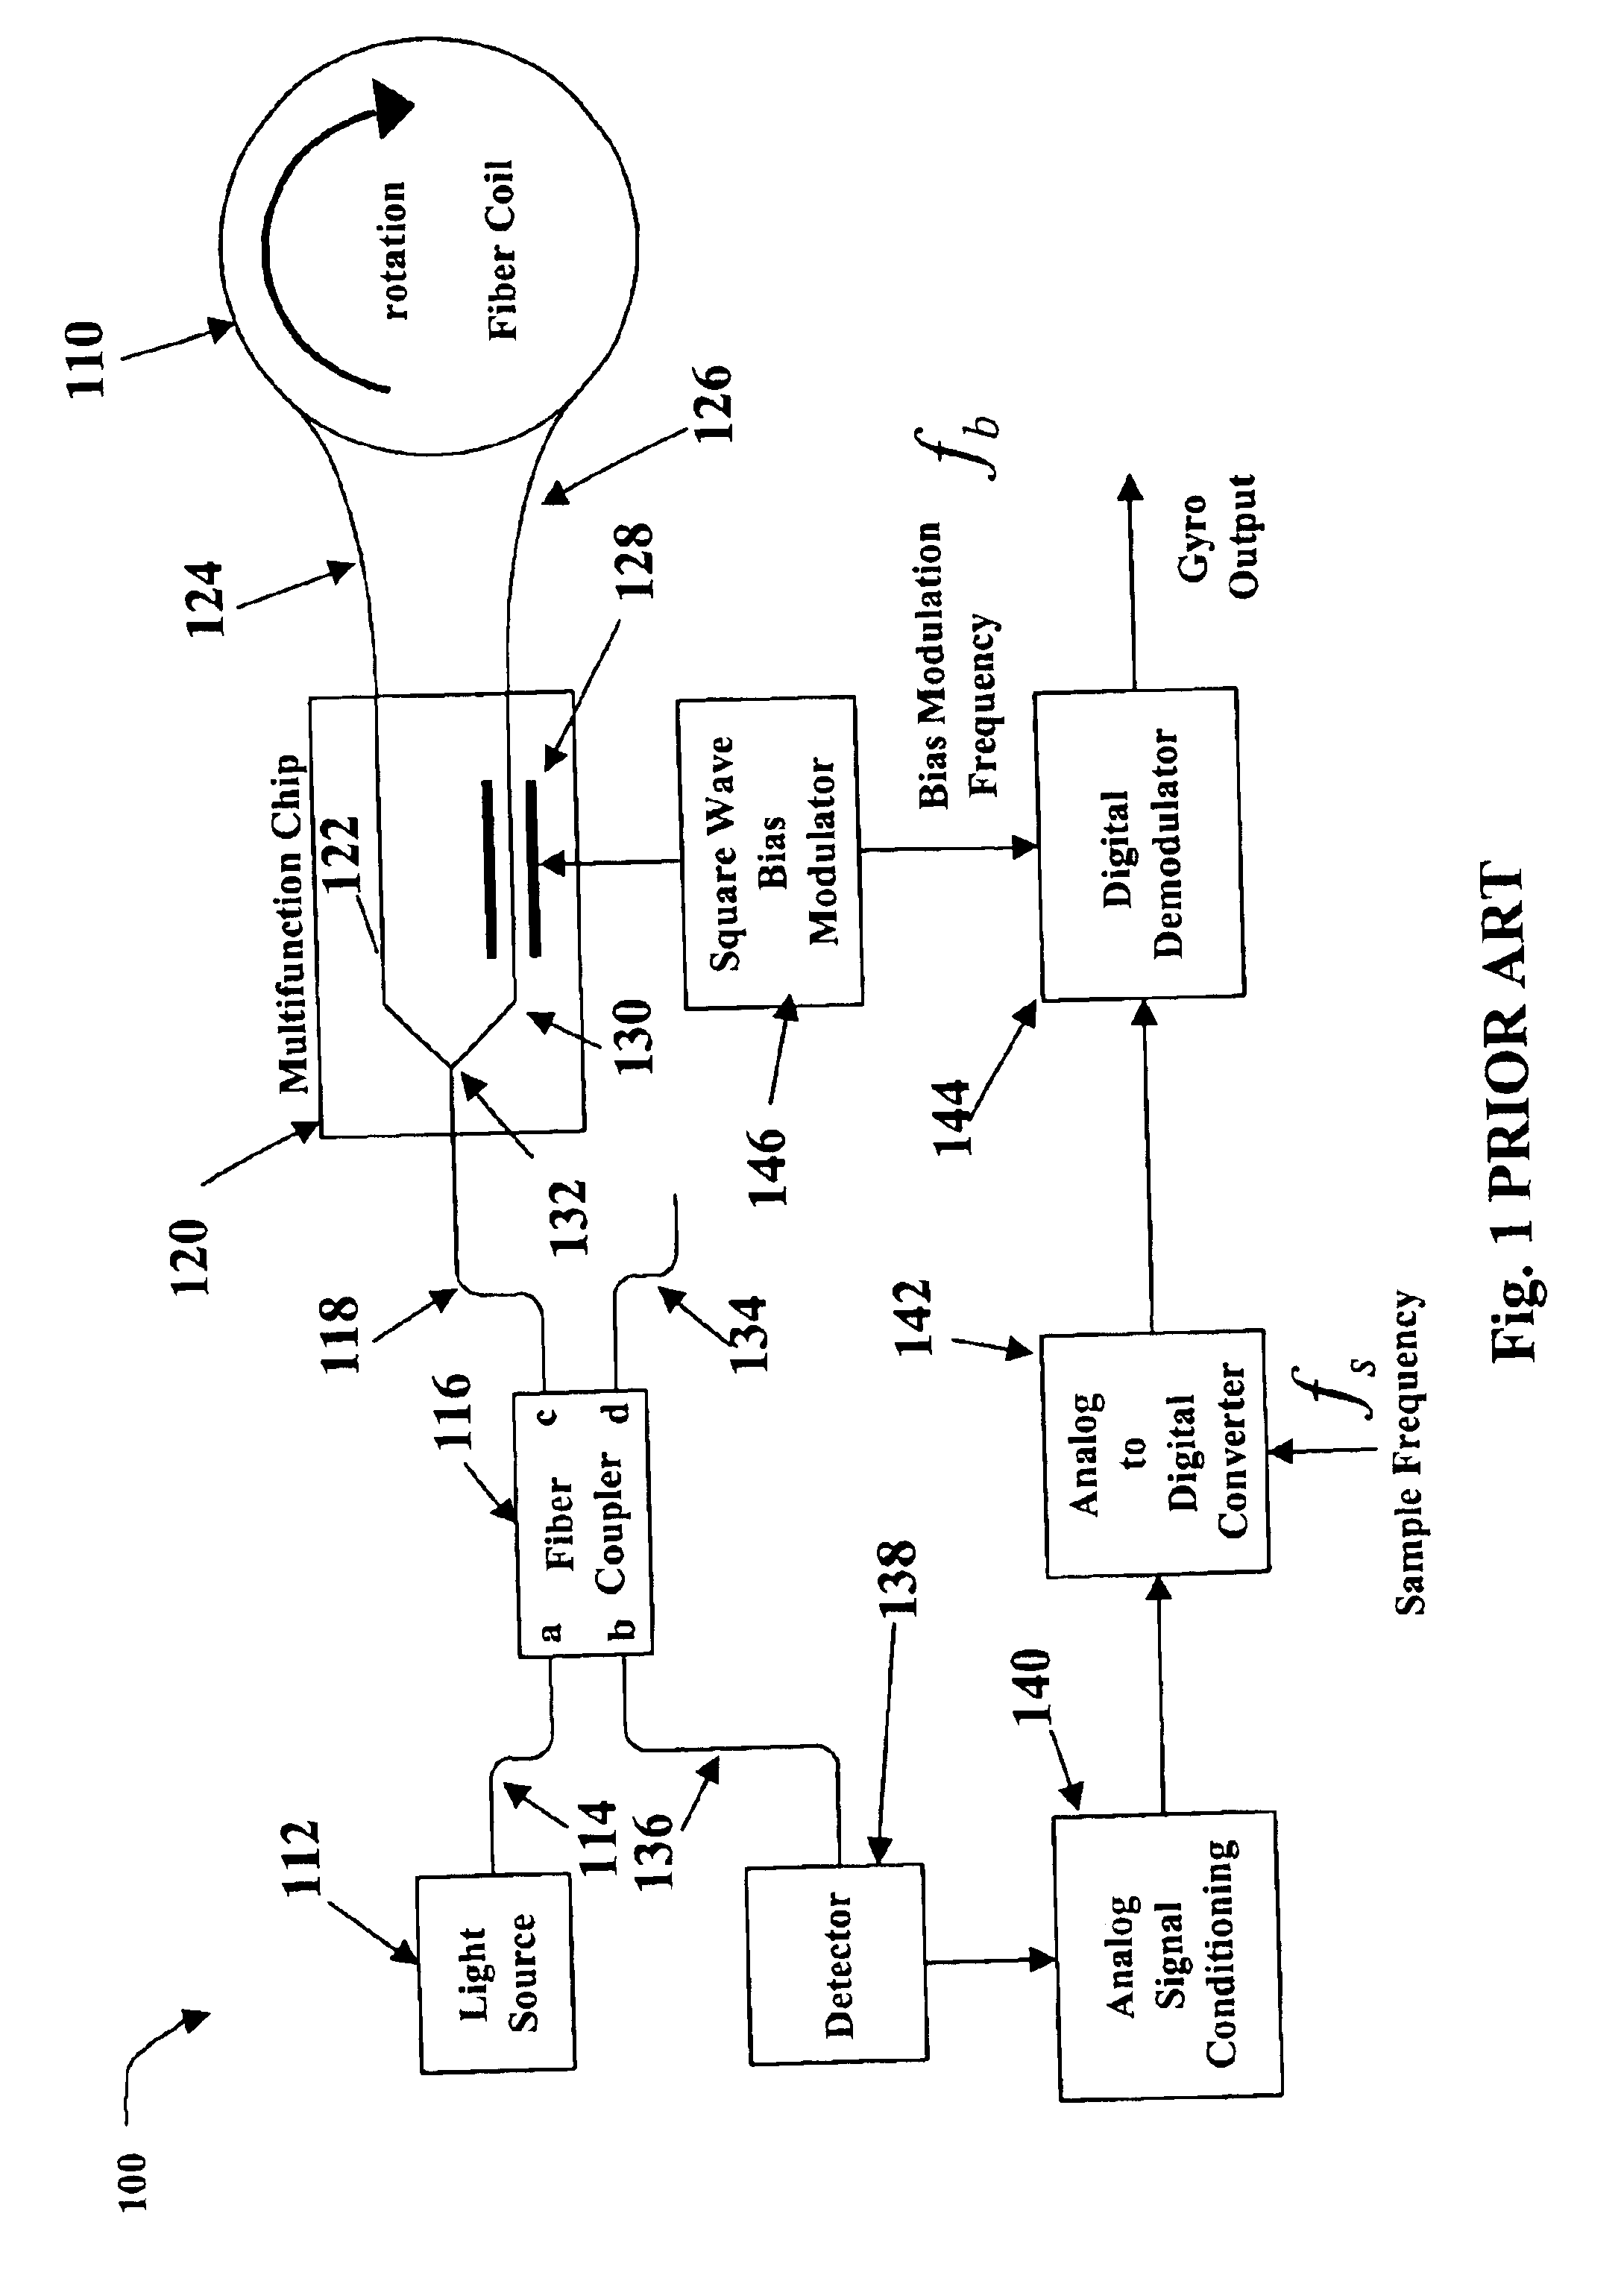 Relative intensity noise controller with maximum gain at frequencies at or above the bias modulation frequency or with second order feedback for fiber light sources